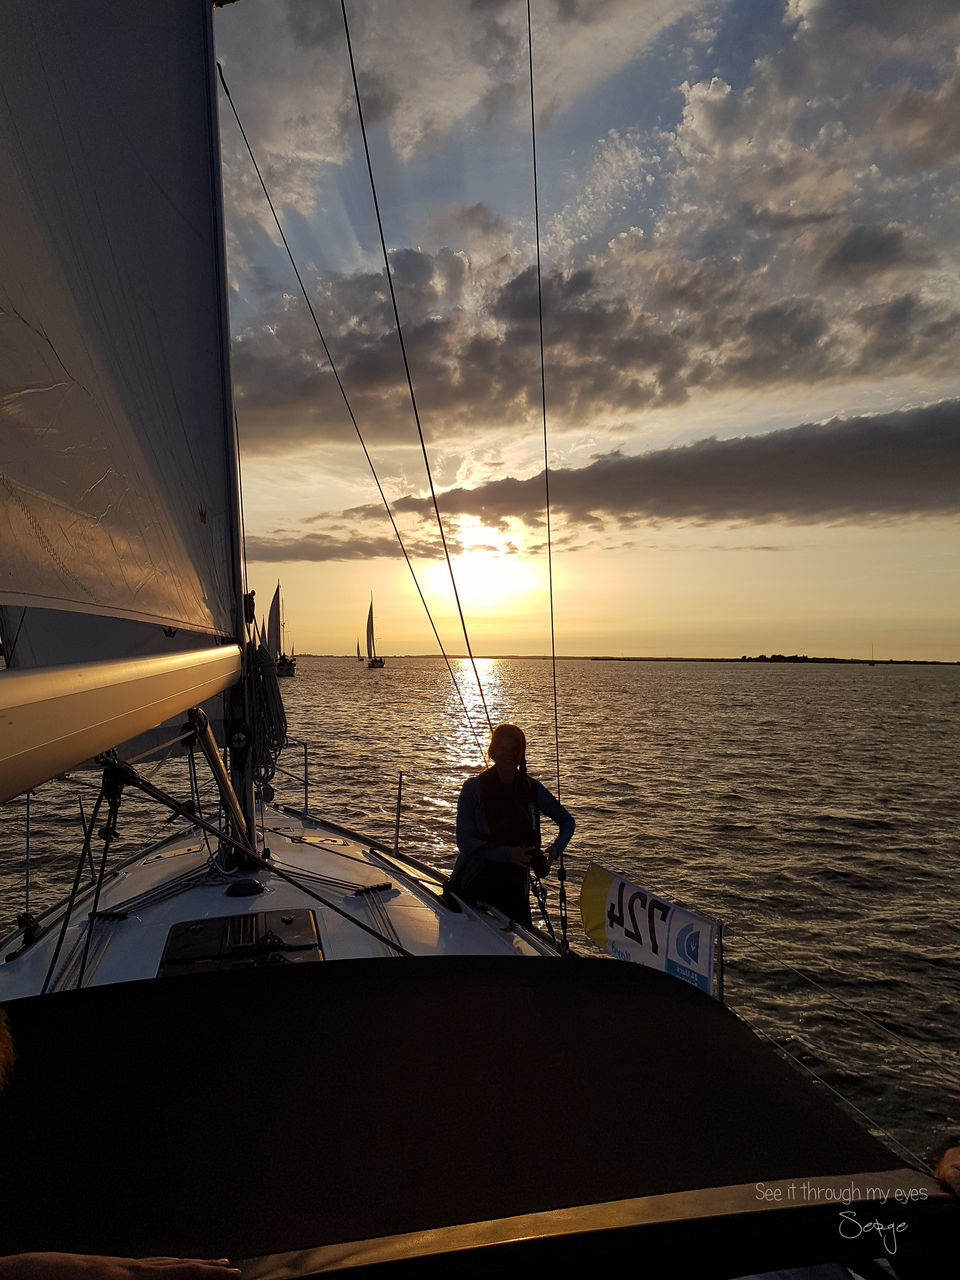 nautical vessel, water, sky, sea, mode of transportation, transportation, sunset, cloud - sky, sailing, nature, beauty in nature, real people, scenics - nature, sailboat, horizon, men, horizon over water, leisure activity, silhouette, outdoors, luxury